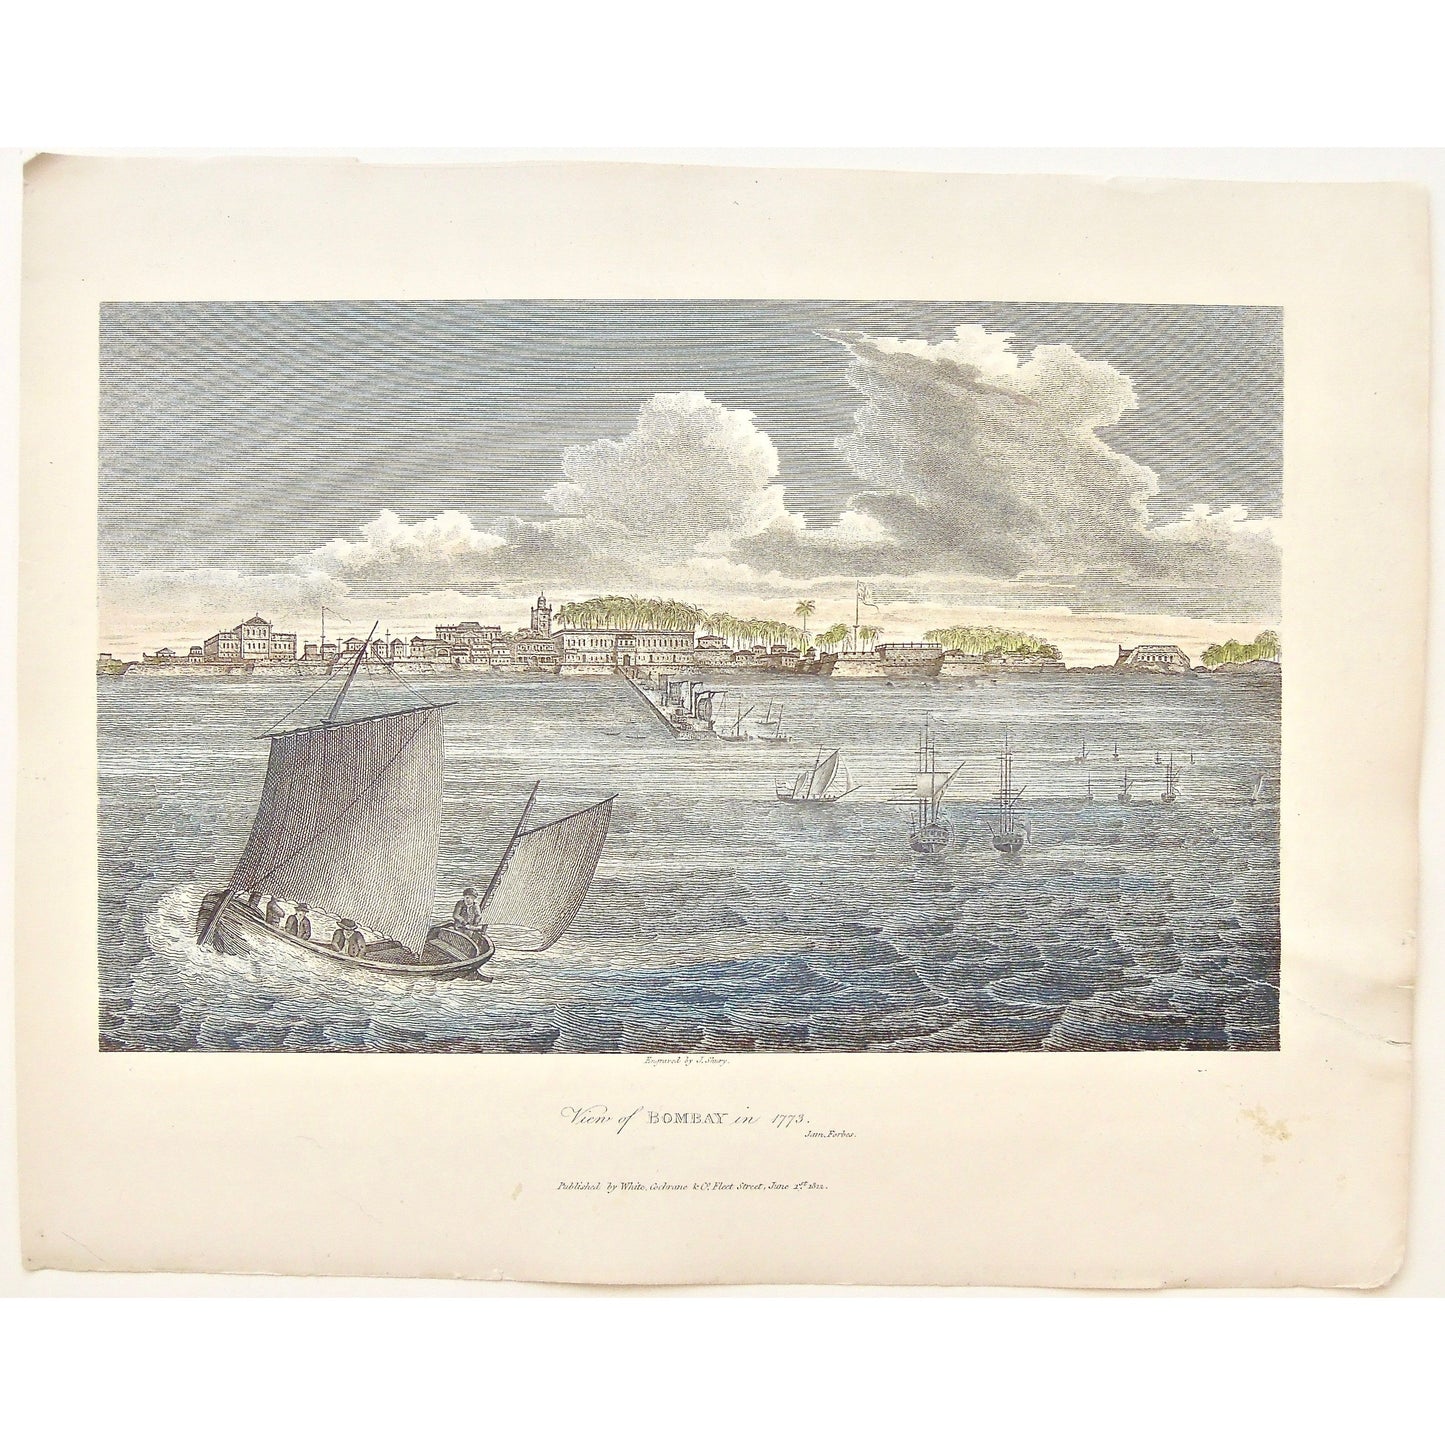 Bombay, 1773, View of Bombay, Bombay from the water, boats, sailing, sailboats, Ships, Coastal town, on the water, India, James Forbes, Forbes, Oriental Memoirs, Oriental, Memoirs, Seventeen Years Residence in India, White, Cochrane & Co., Horace’s Head, Fleet Street, London, 1812, 1813, Shury, Bensley, Bolt Court, Antique Print, Antique, Prints, Vintage Prints, Vintage, Collector, Collectable, Original, Unique, Rare Map, Rare, Rare books, engravings, engraving, steel engraving, art history, history, histor